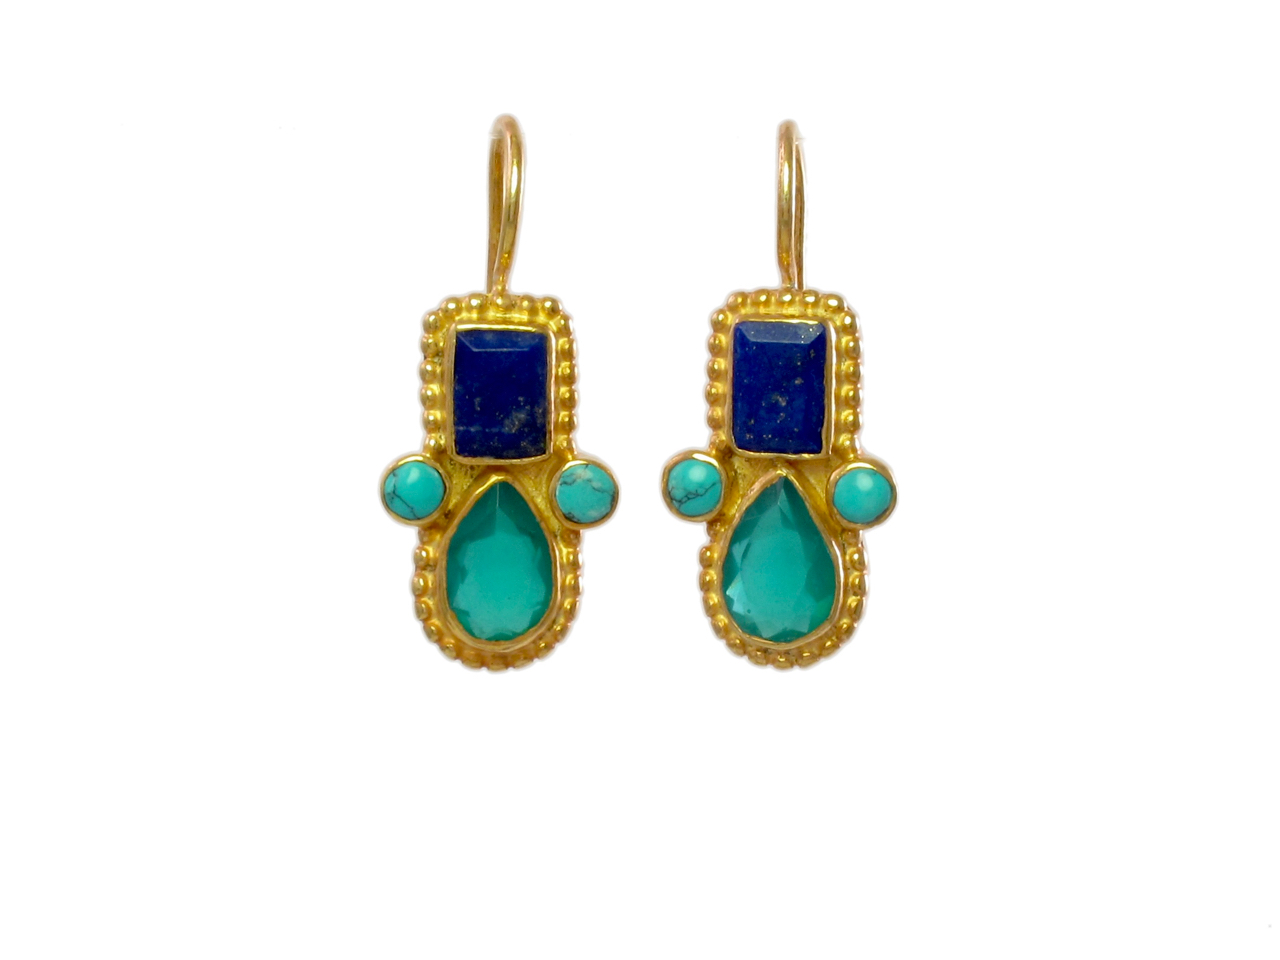 Earring with lapis and onyx in Etruscan setting – E1032